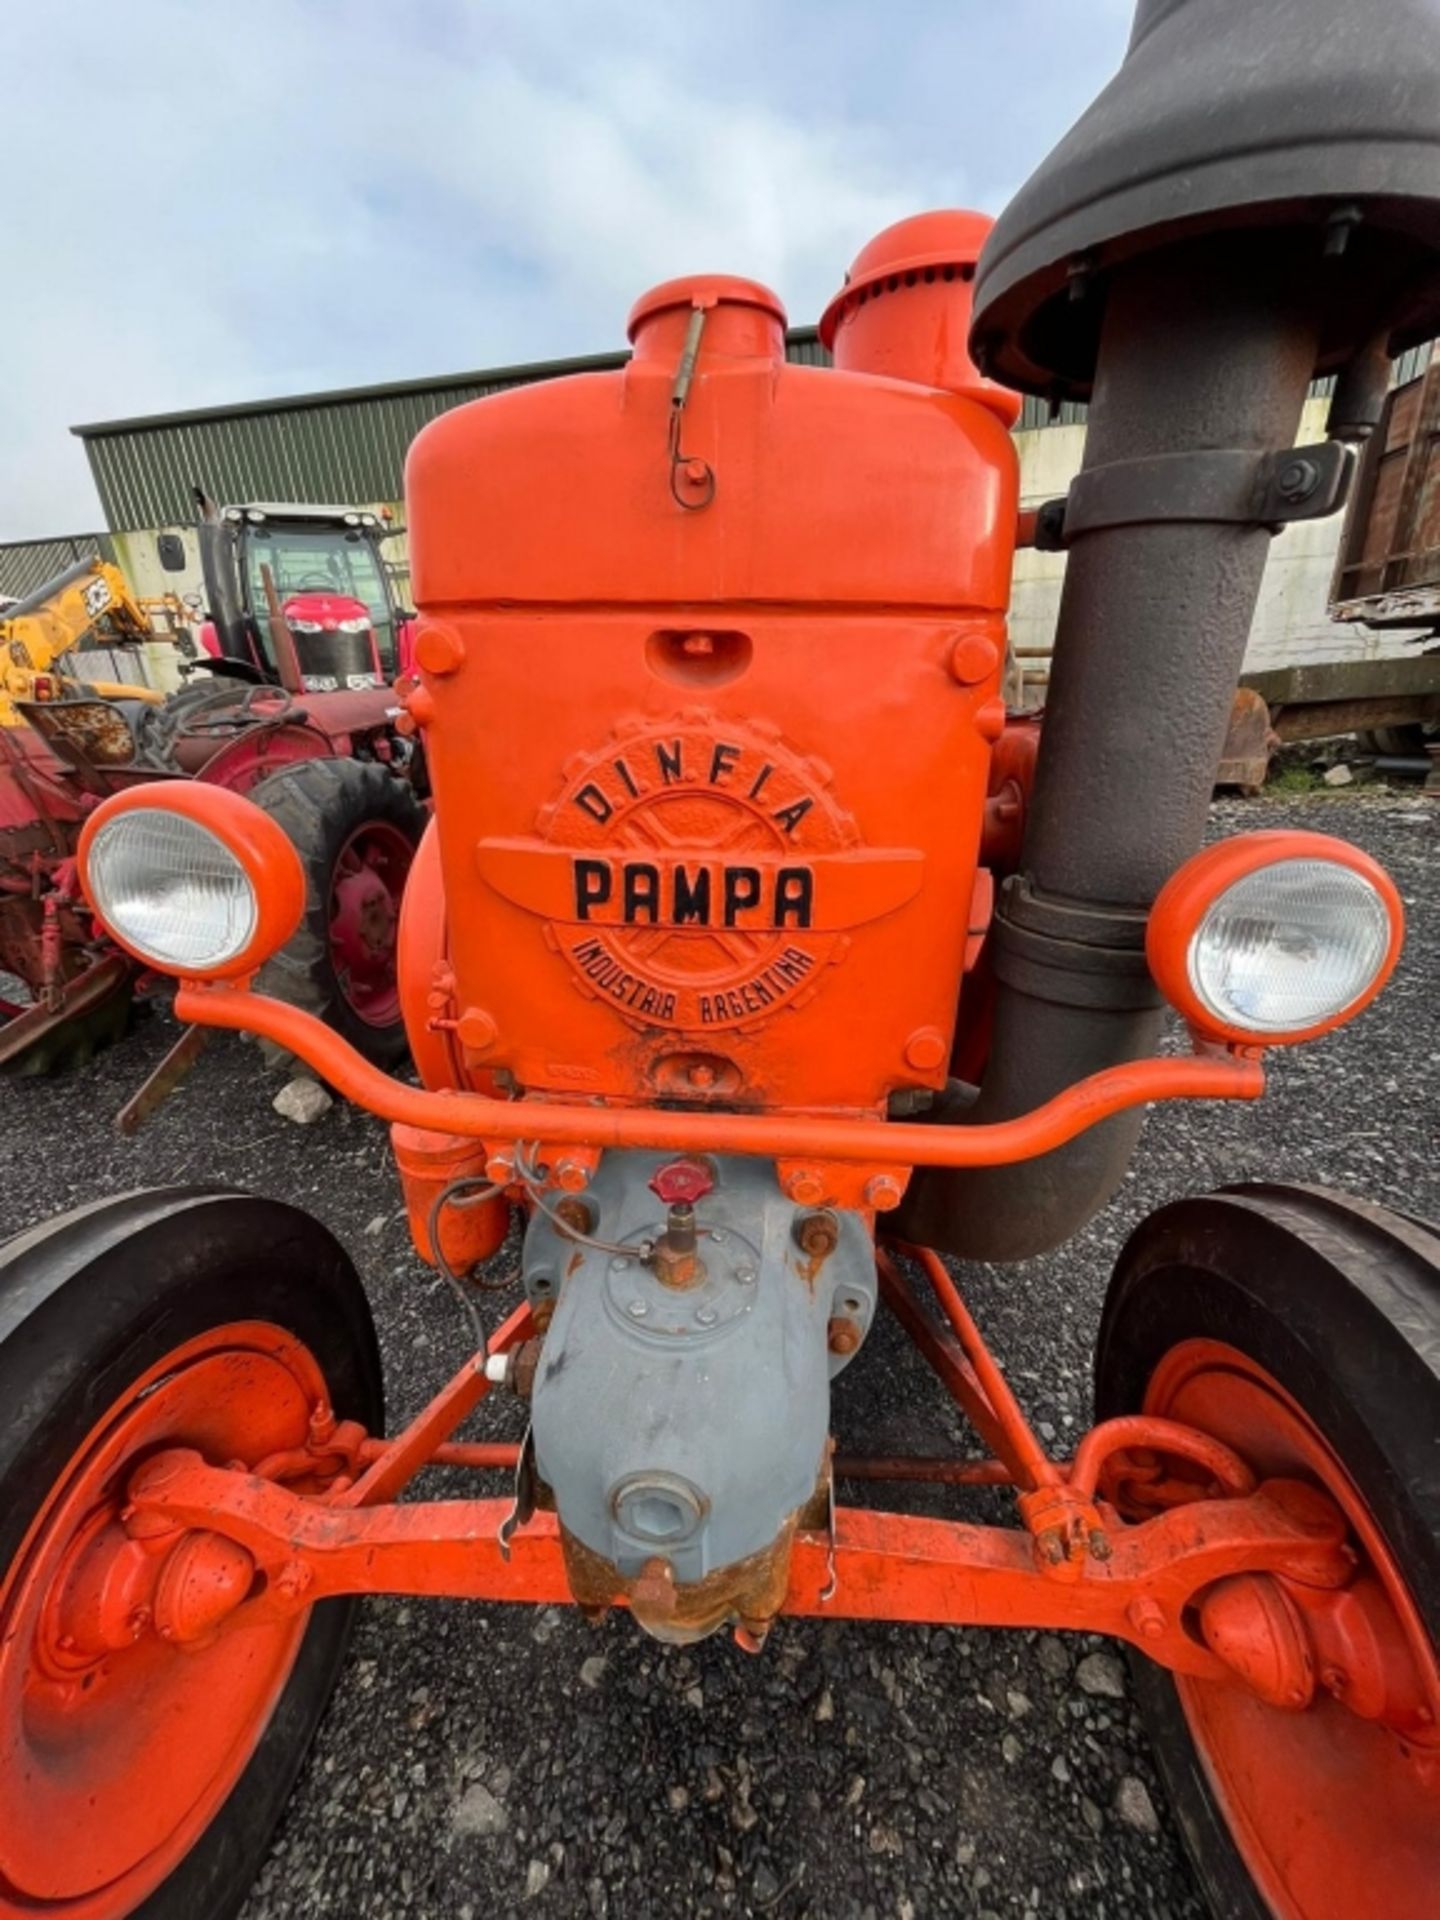 VINTAGE TRACTOR DINFIO PAMPA - Image 15 of 29